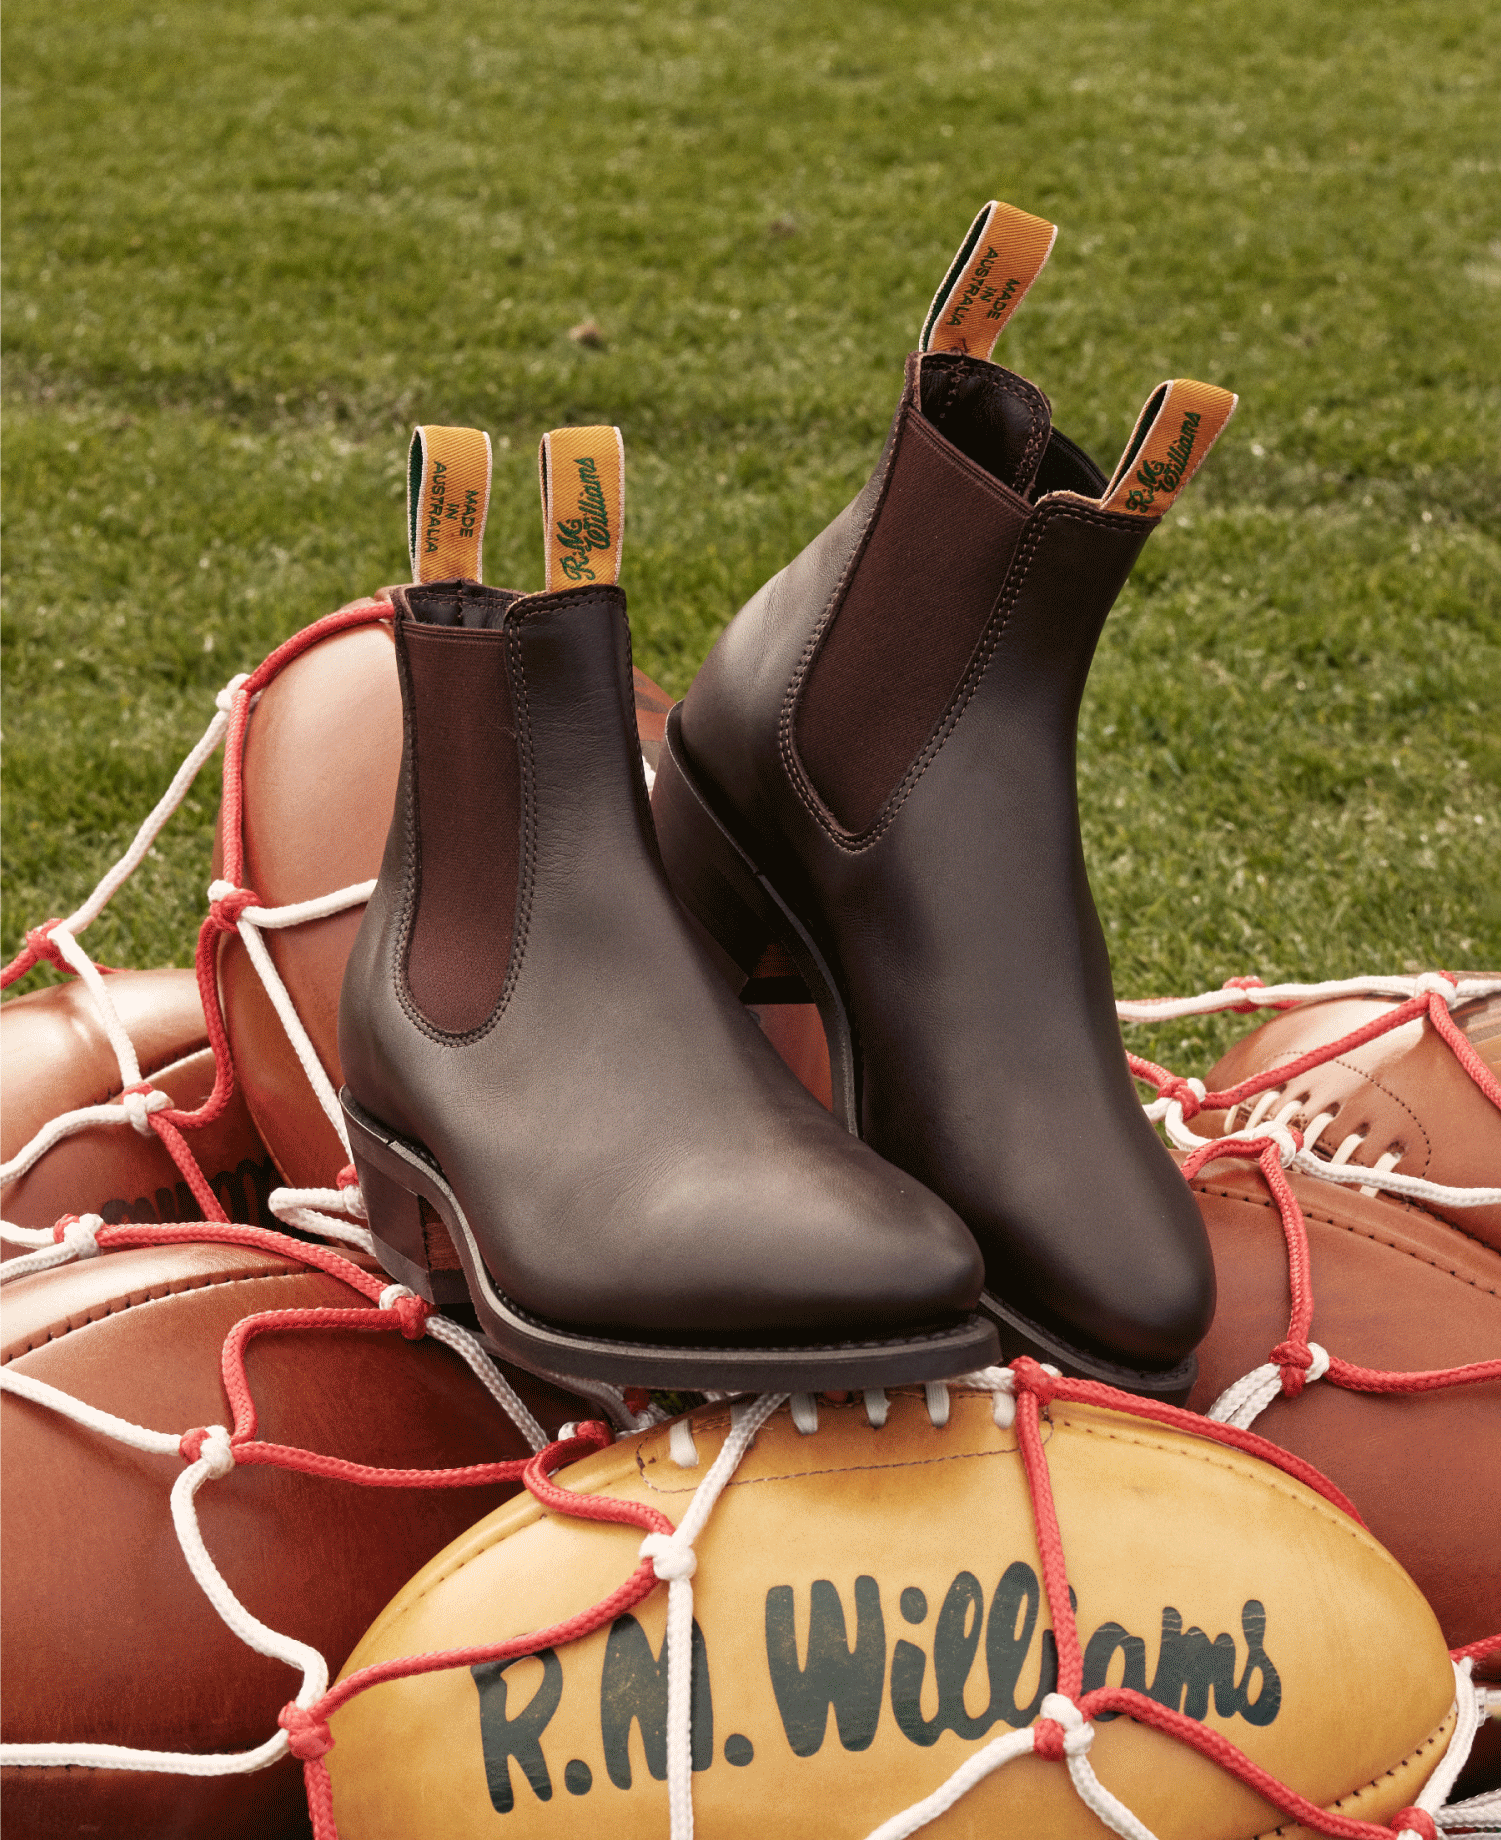 Crafted for life - R.M.Williams proudly made in Australia